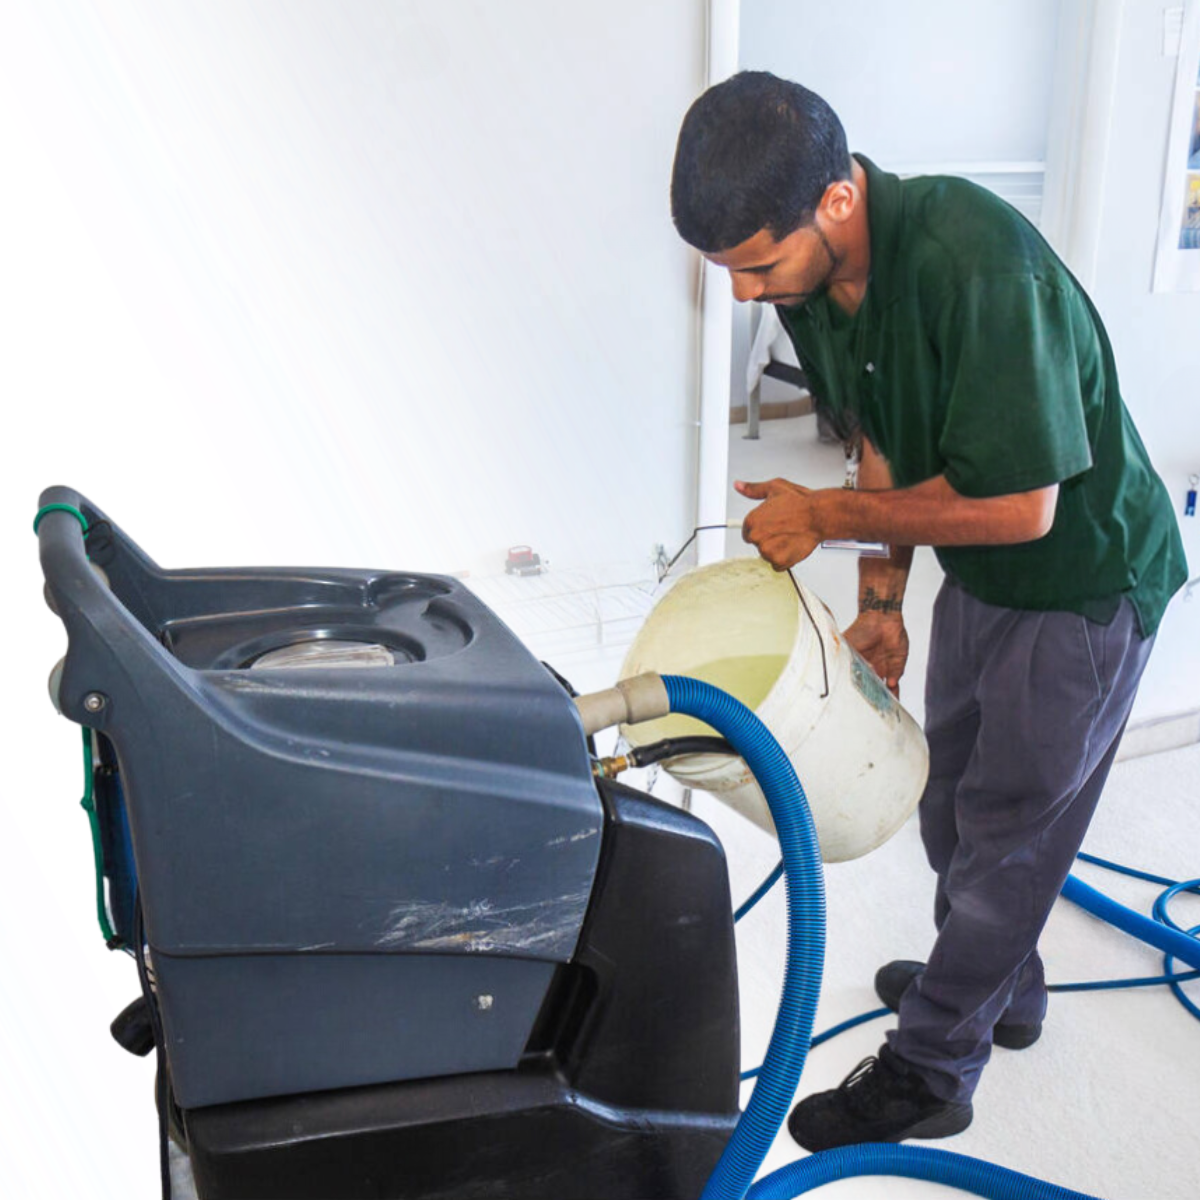 carpet cleaning manchester image 124